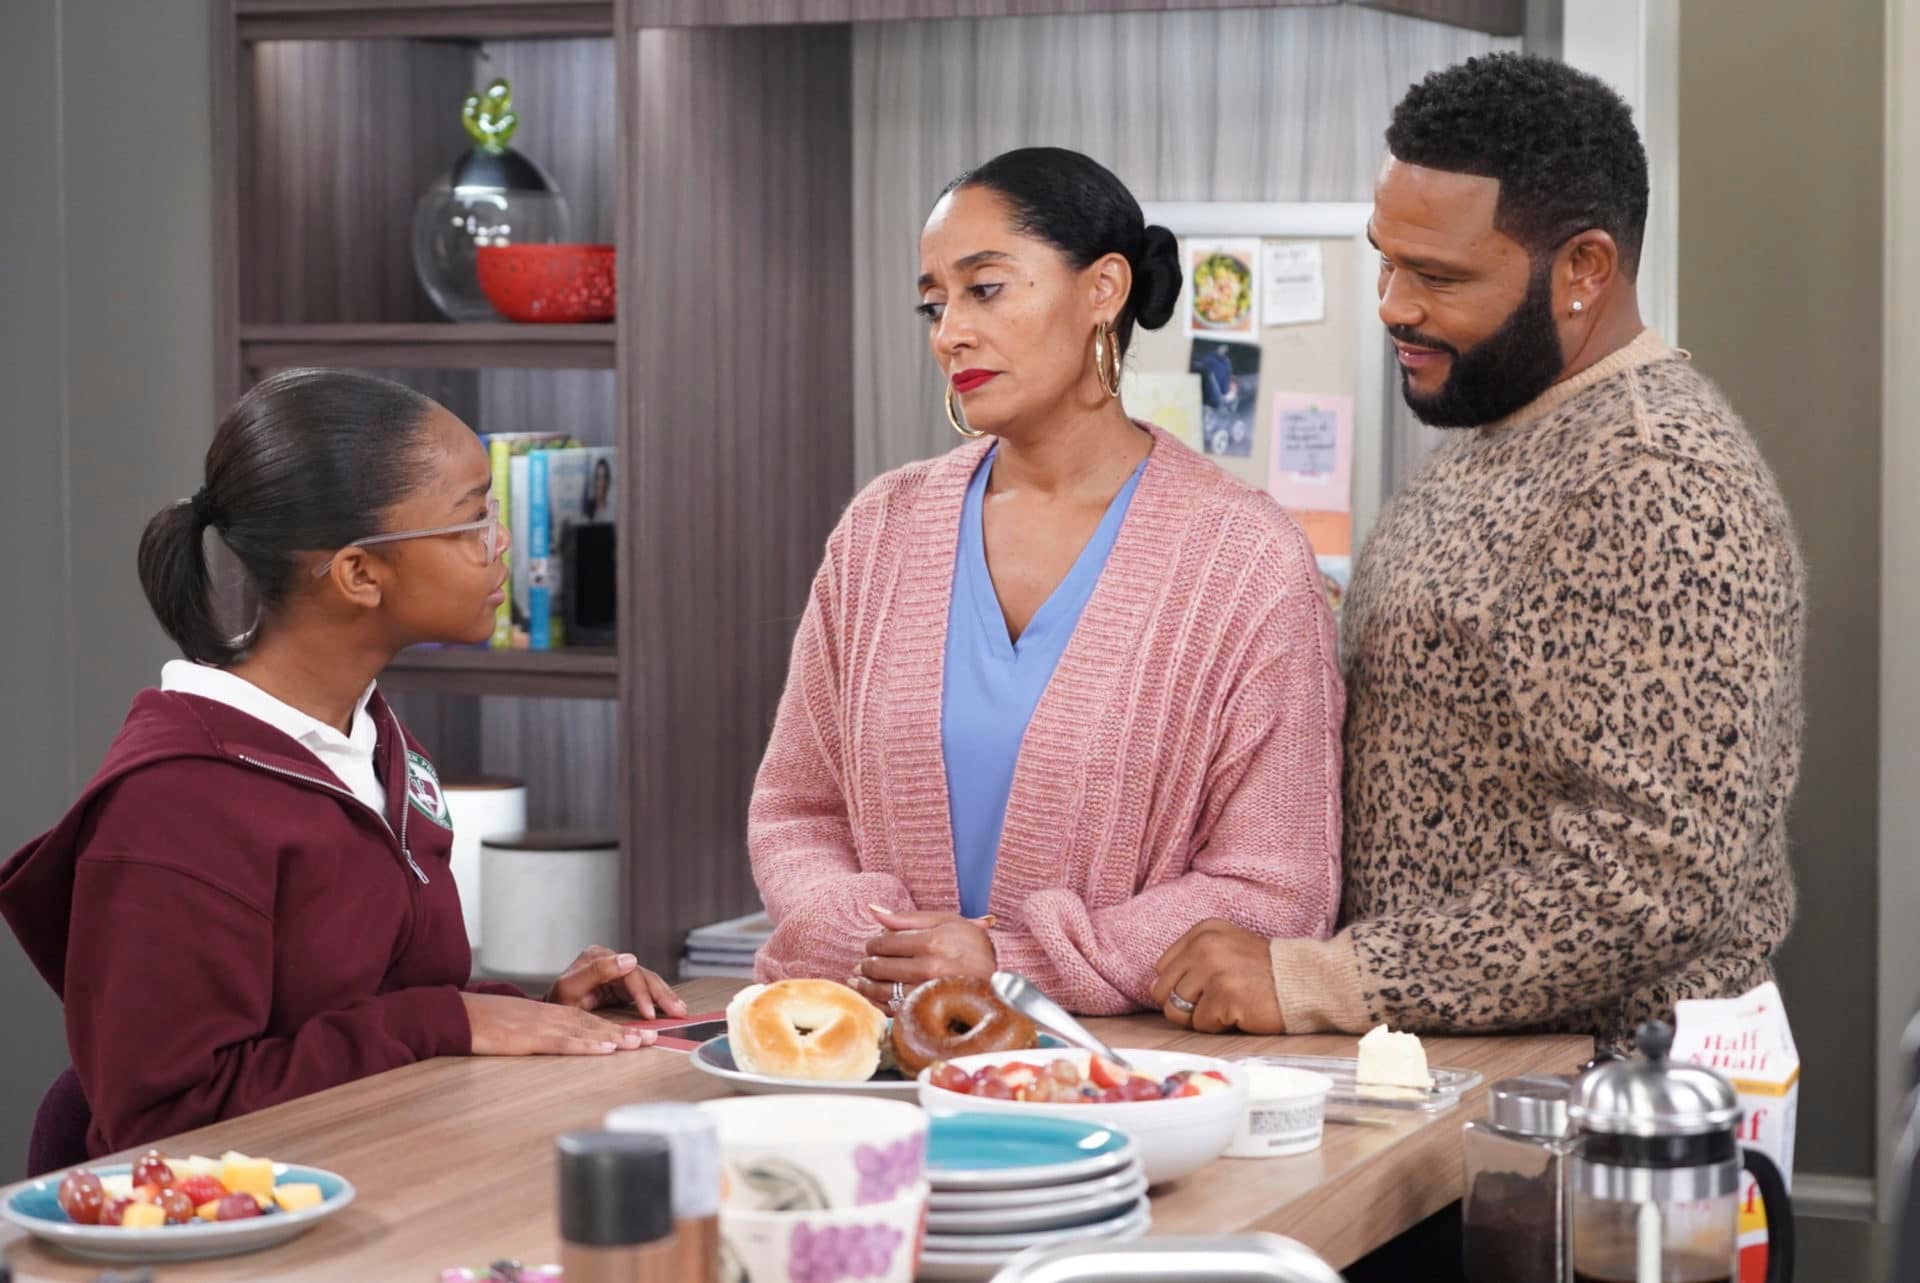 'Black-ish' Poignantly Tackled Colorism With An Honest Family Conversation